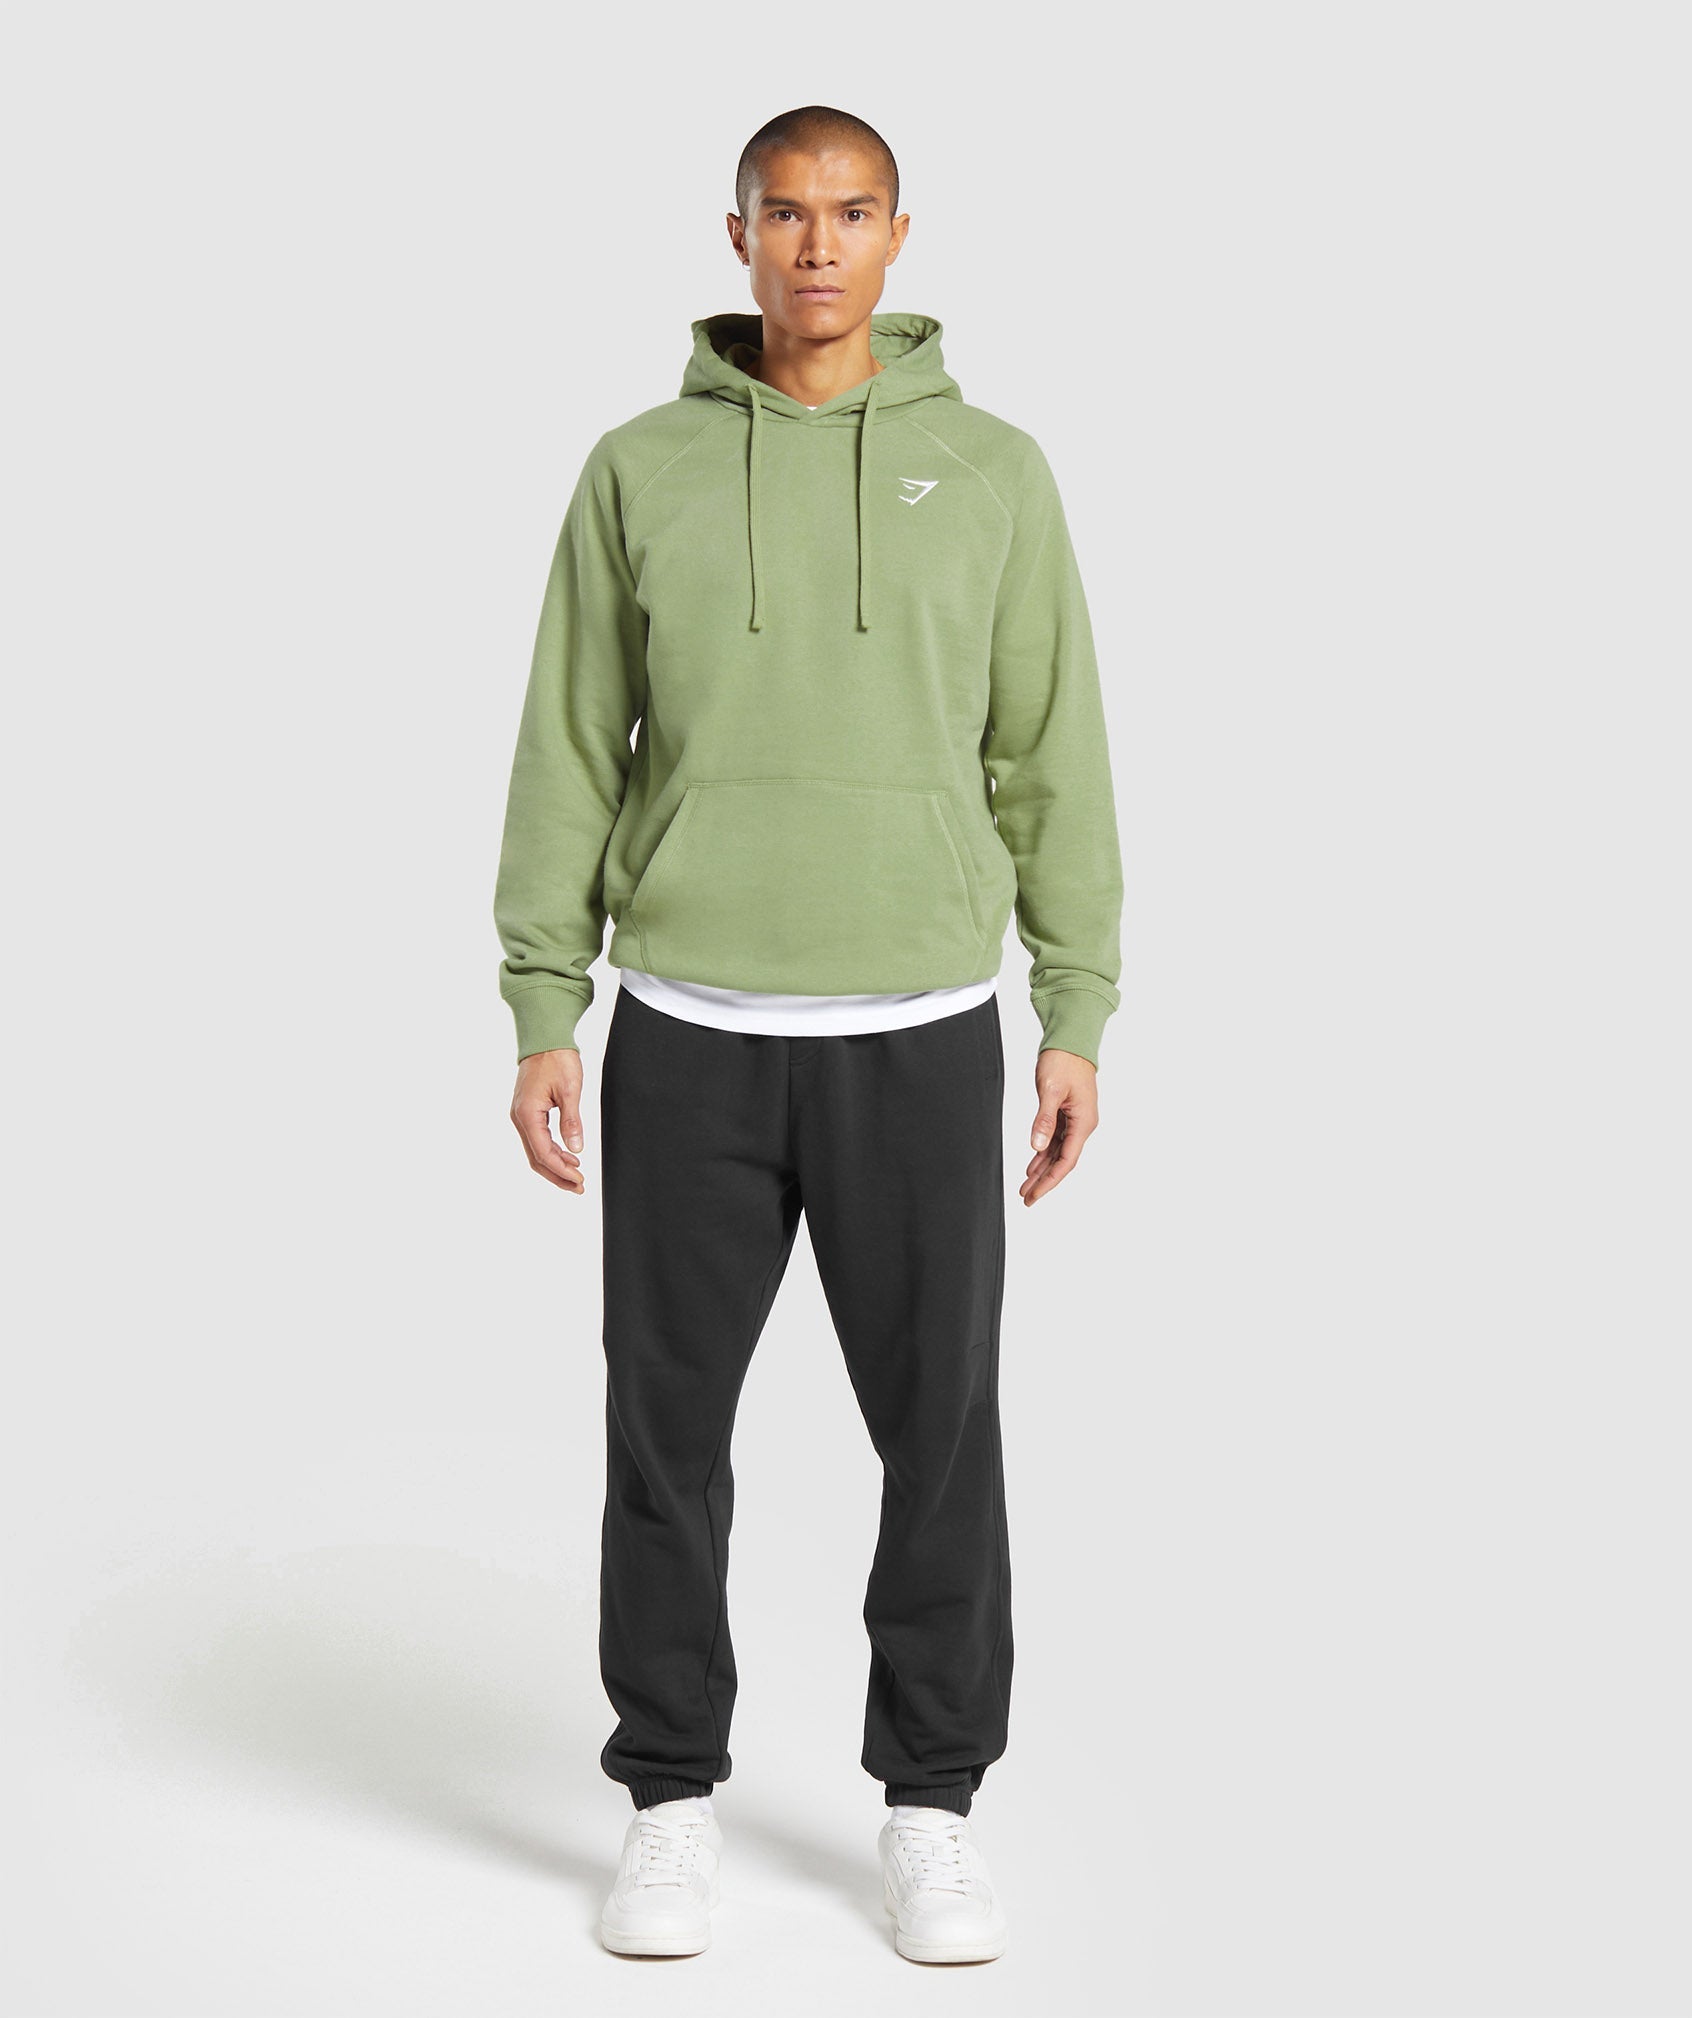 Crest Hoodie in Natural Sage Green - view 4